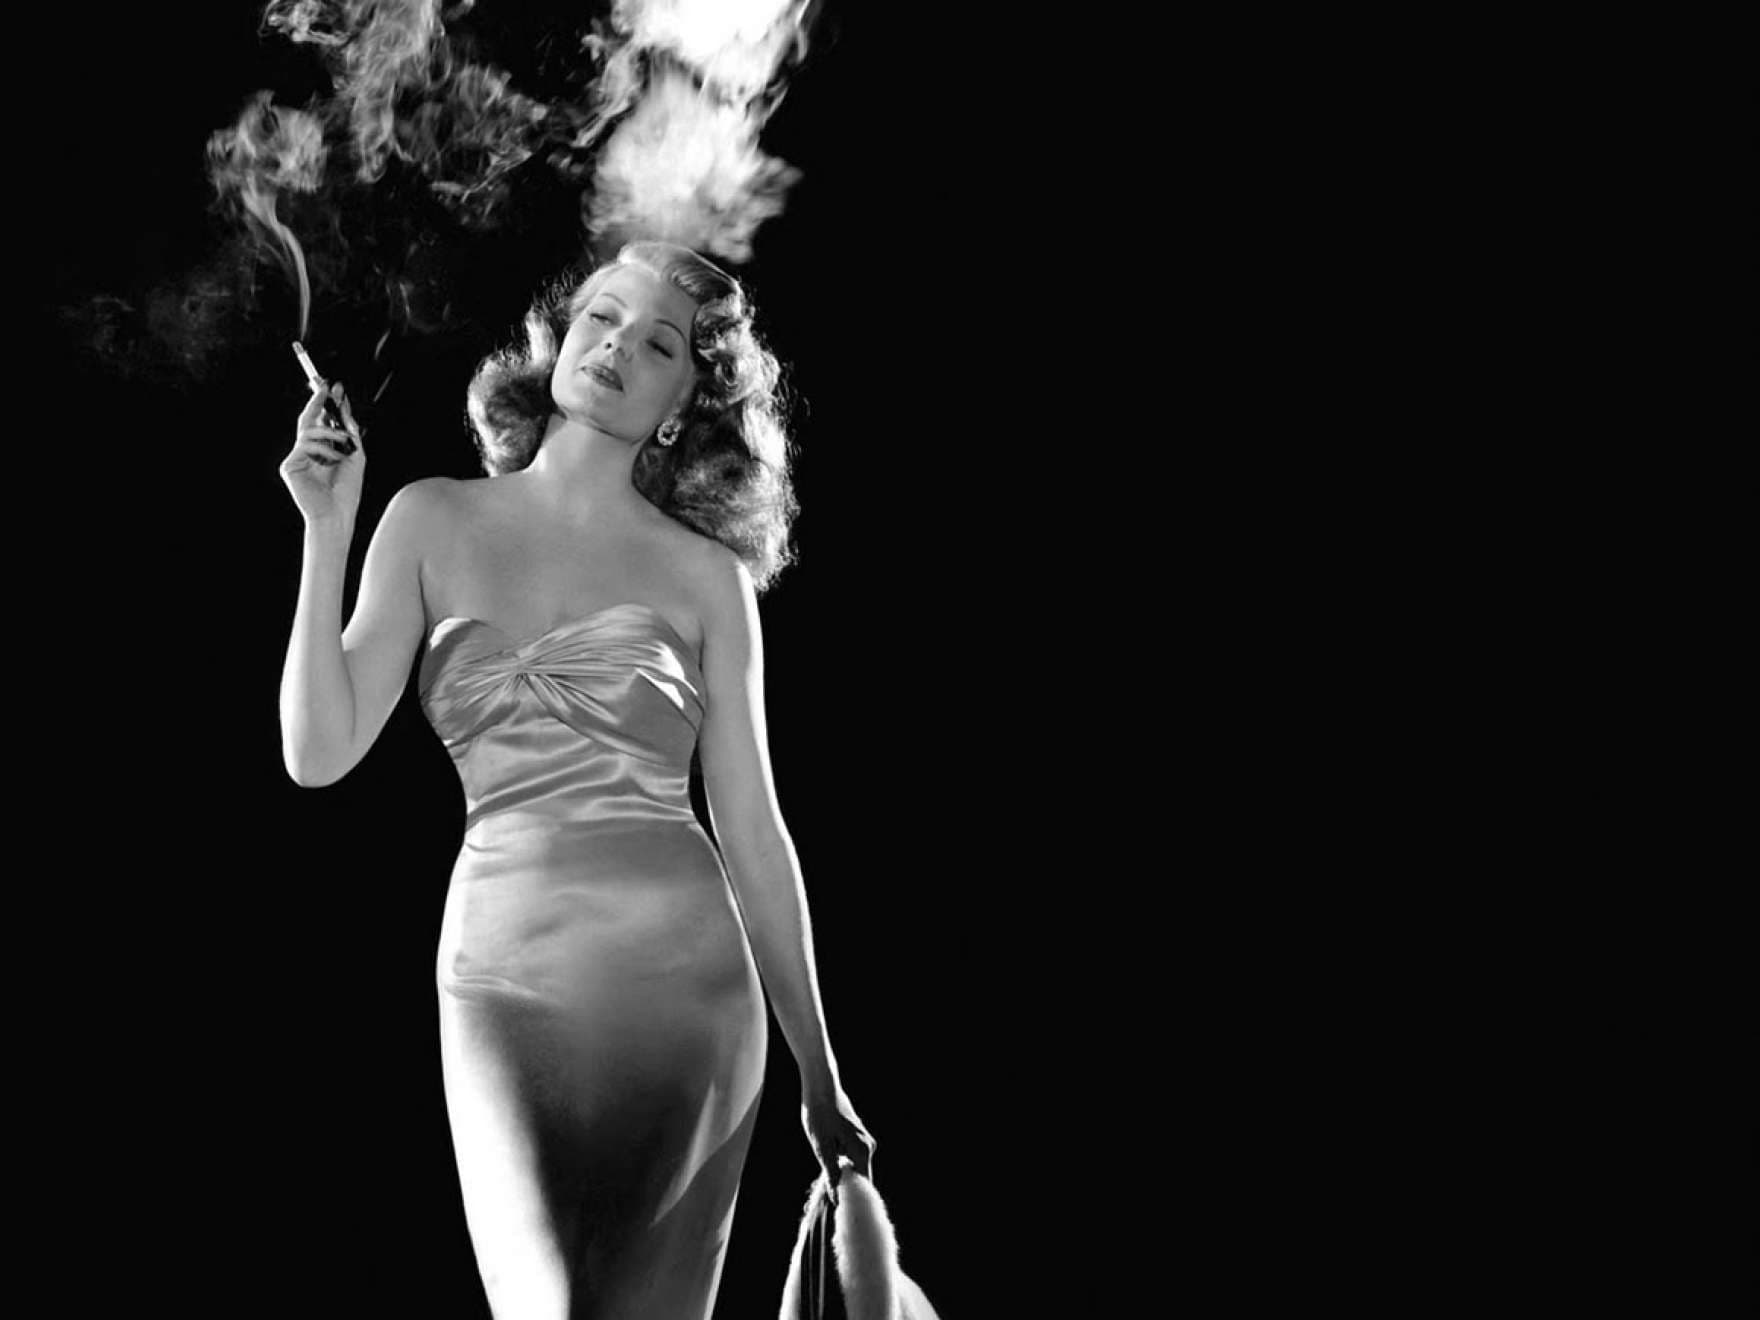 MFA Proves The '50s Femme Fatale Archetype Has Evolved Into The Present Day